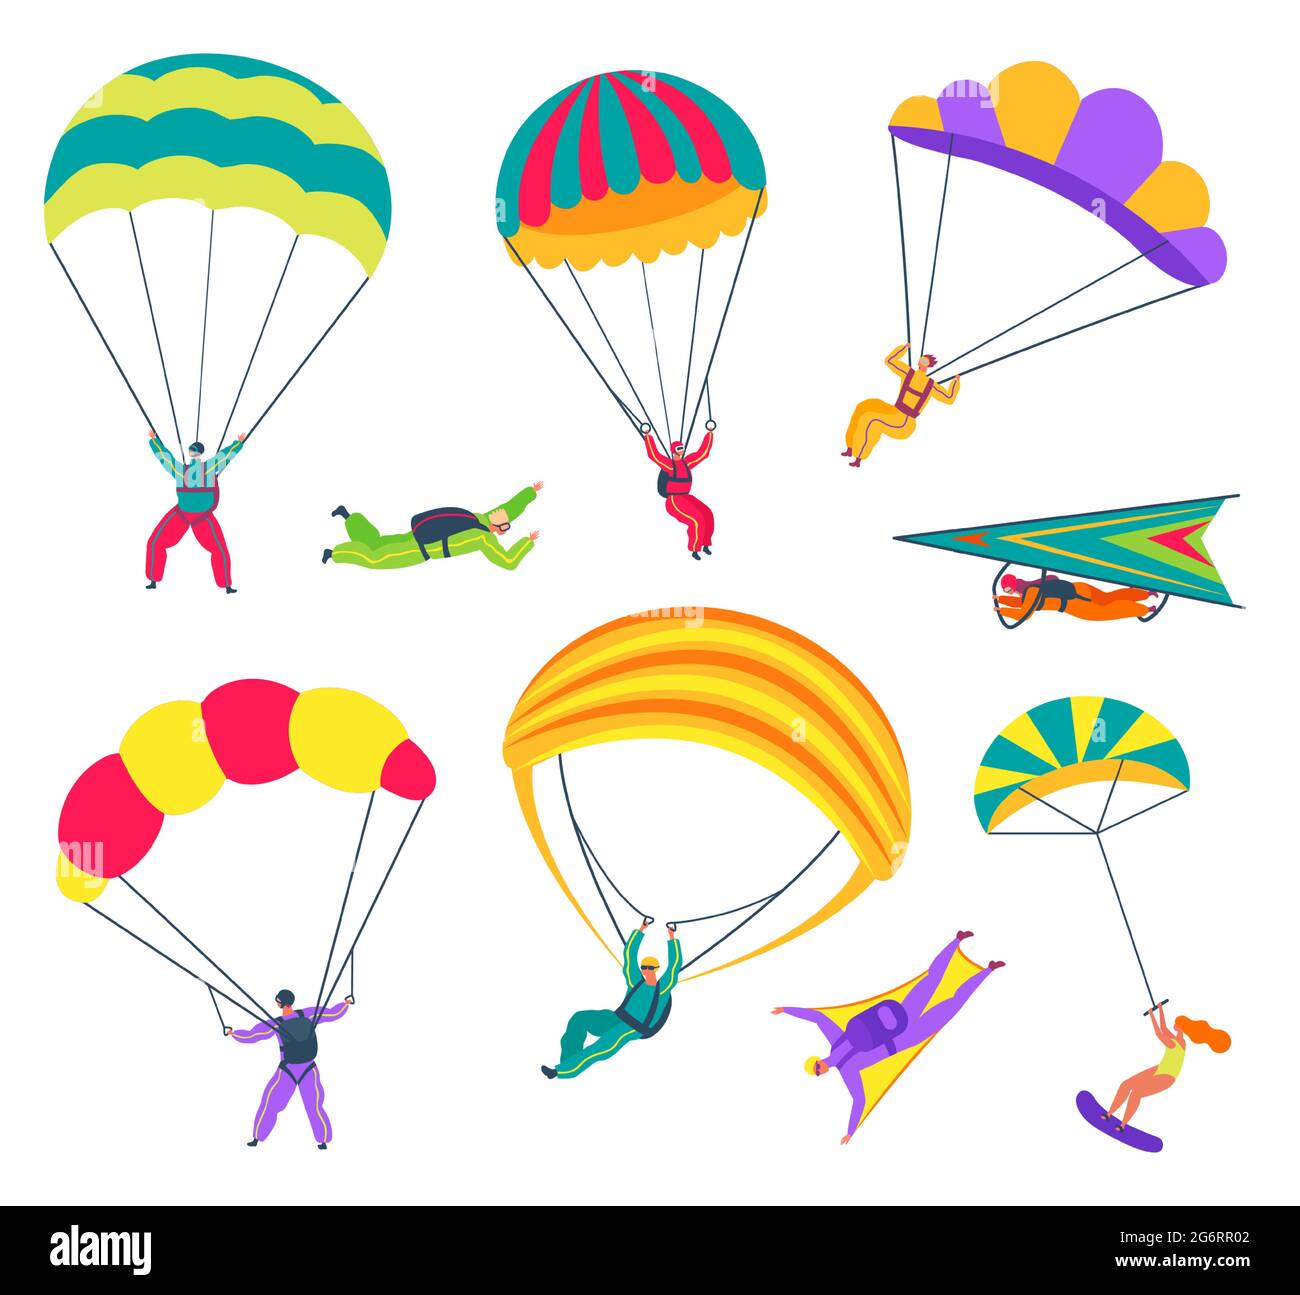 Skydivers. People with parachutes flying in sky. Professional paragliders, skydivers in wingsuits. Extreme sports activities vector set. Man and woman having active recreation for adrenaline Stock Vector